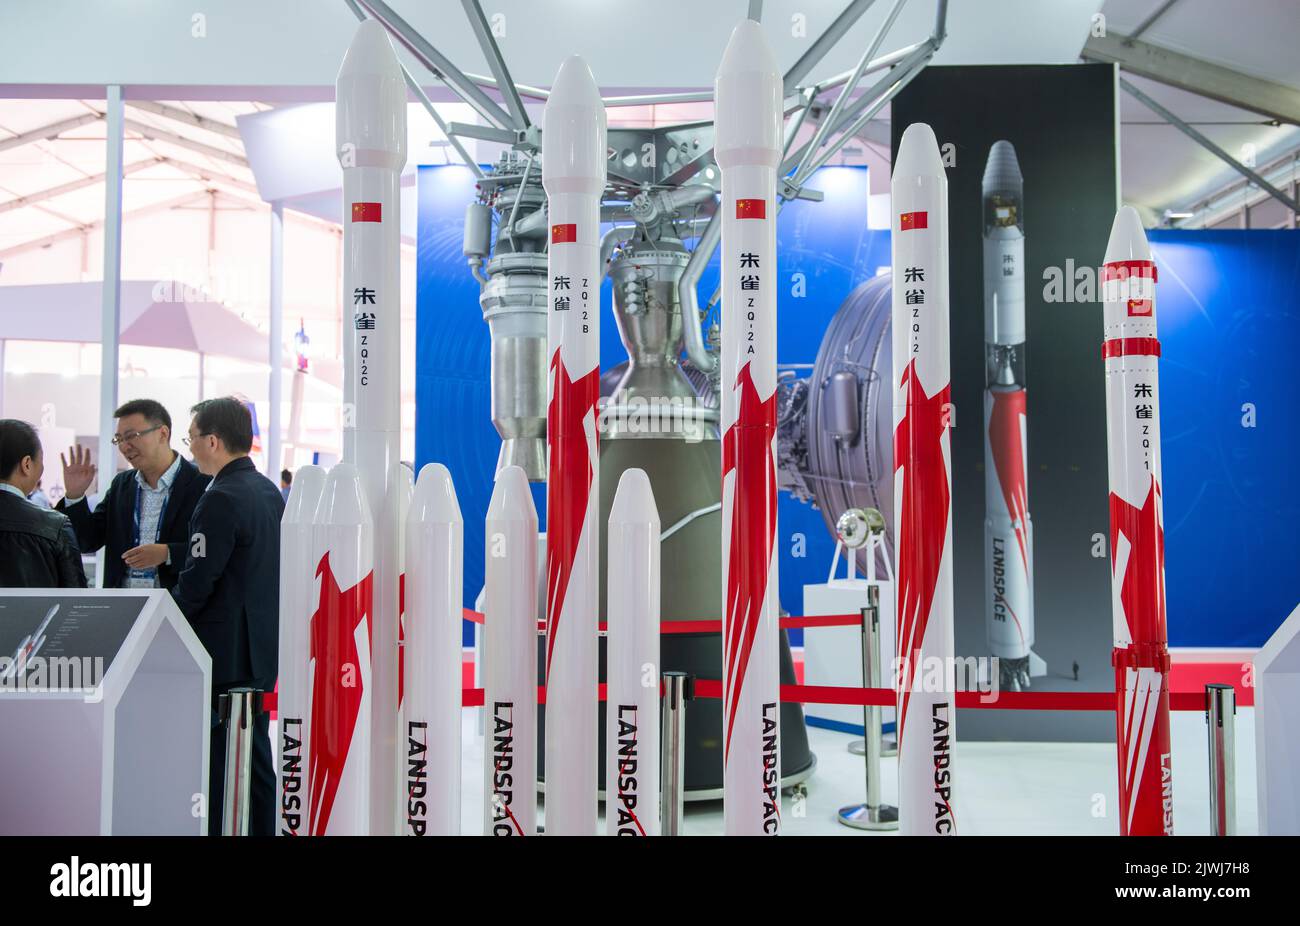 August 30, 2019, Moscow region, Russia. Mock-ups of launch vehicles manufactured by Chinese private space launch company Landspace Technology Corporat Stock Photo